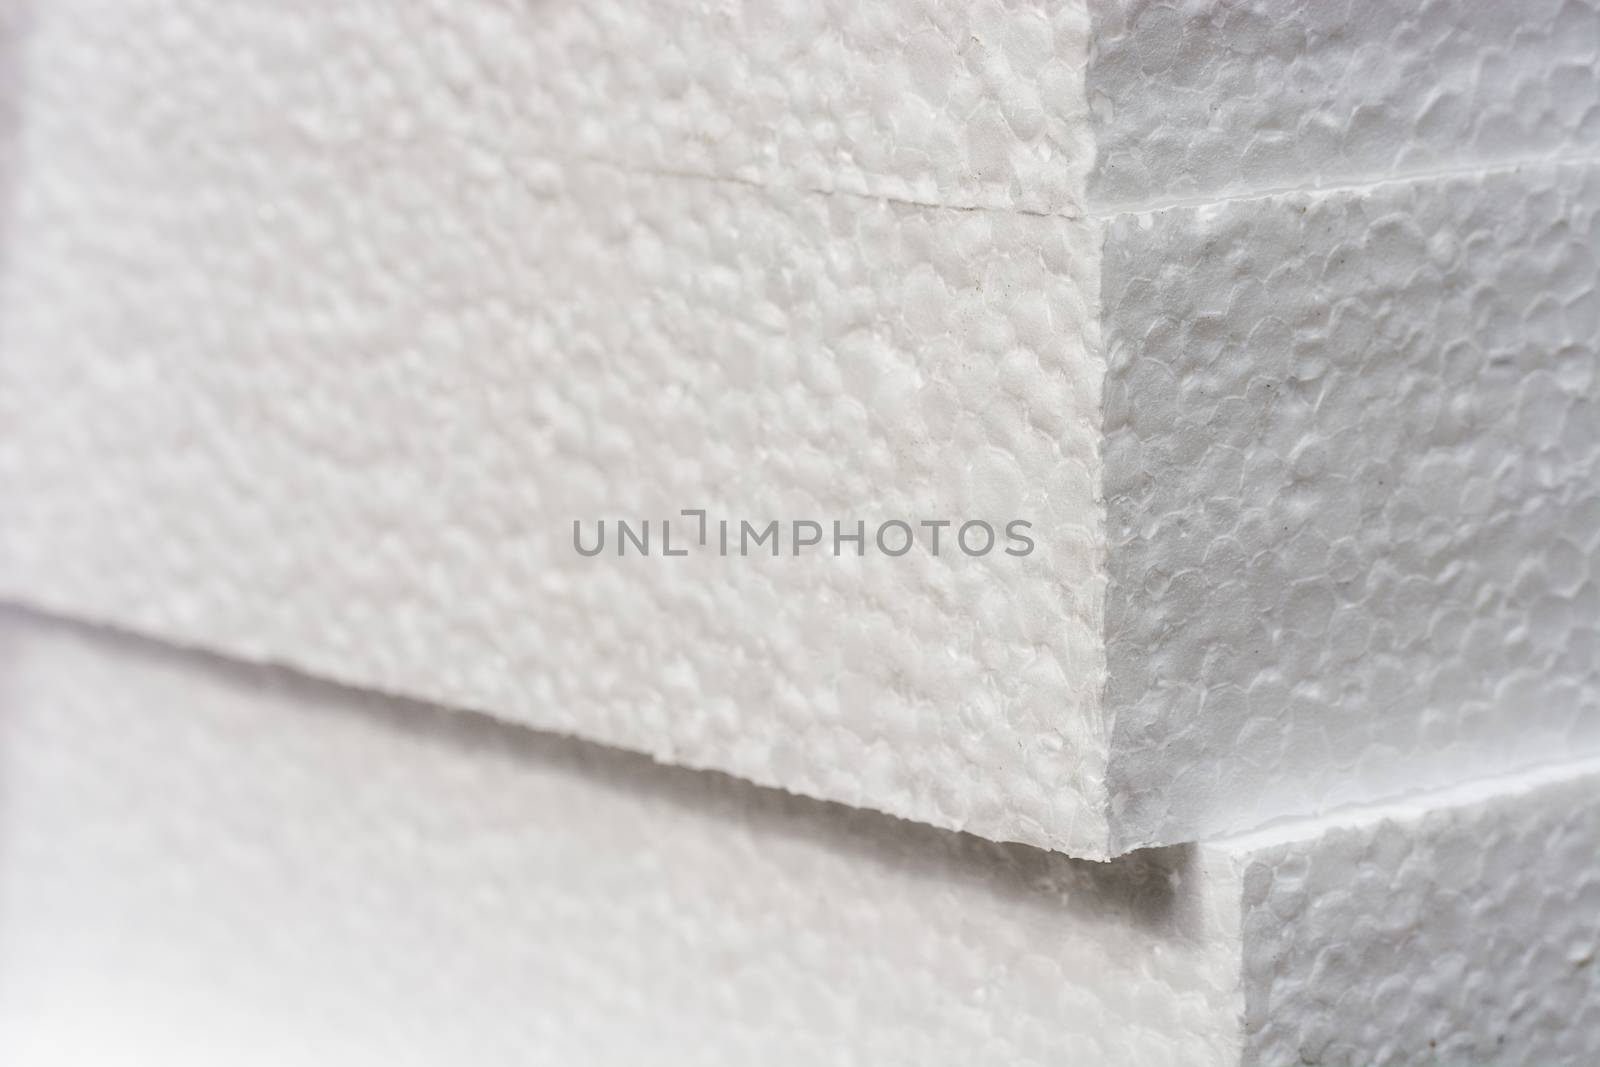 Polystyrene insulation boards background with copyspace and accented sharpness on edges